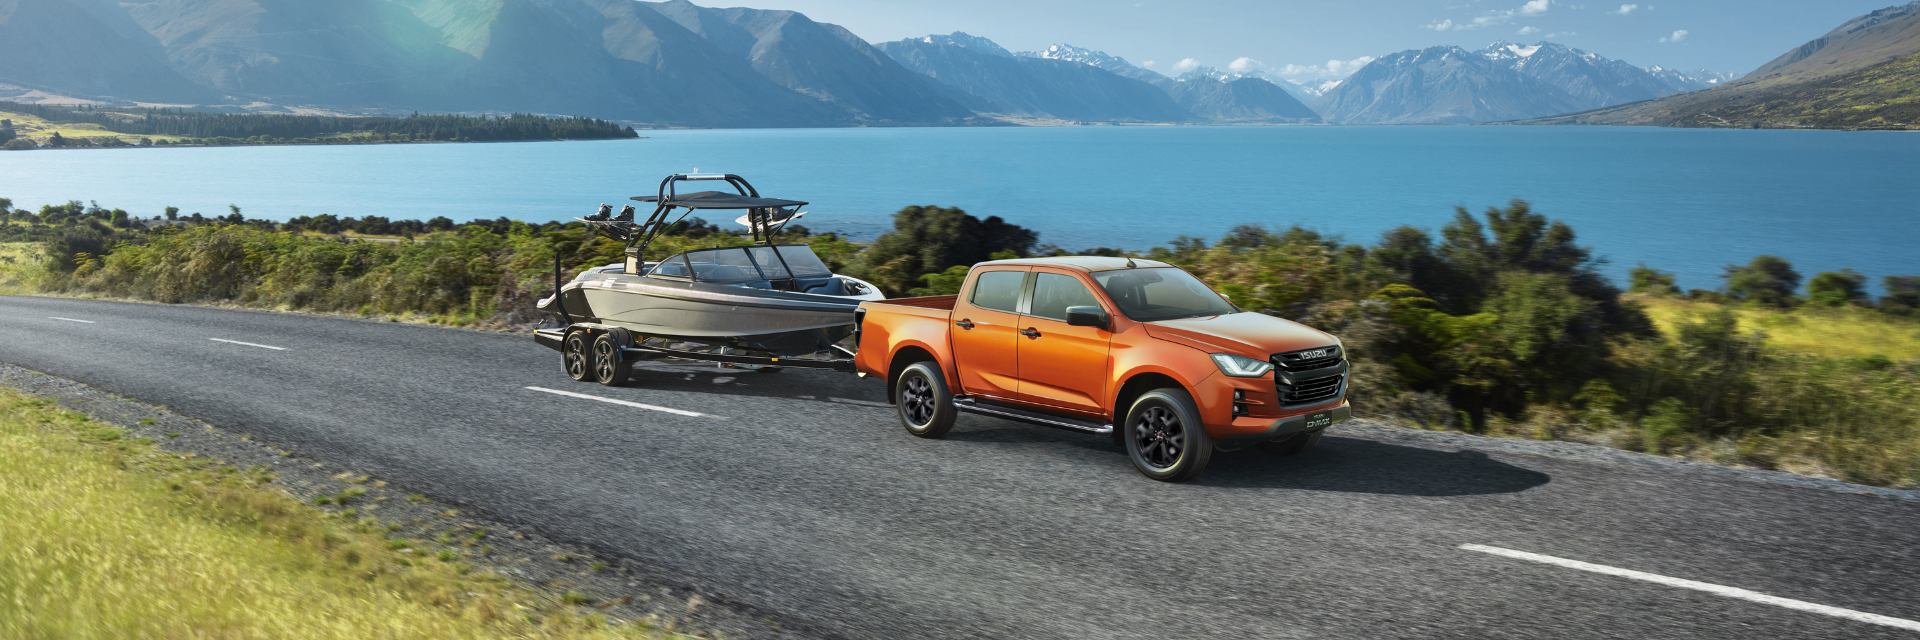 Pick Up Truck Towing Boat